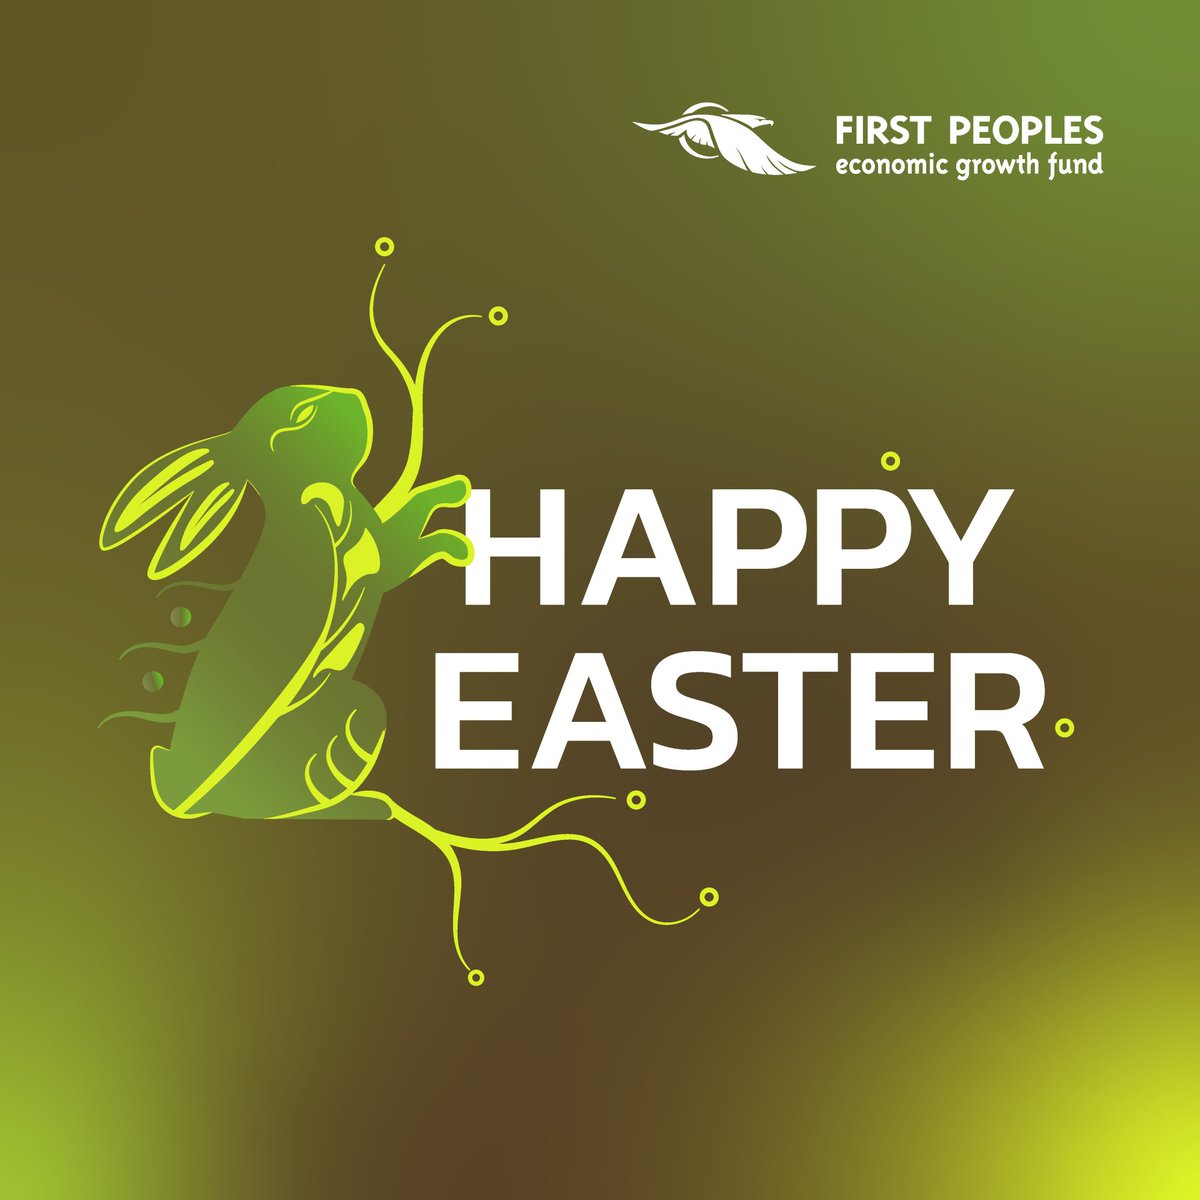 Happy Easter Wishing an Egg-citing break to members of our community who observe.

#FPEGF #YourGrowthPartner #Eastersunday #Easterbreak